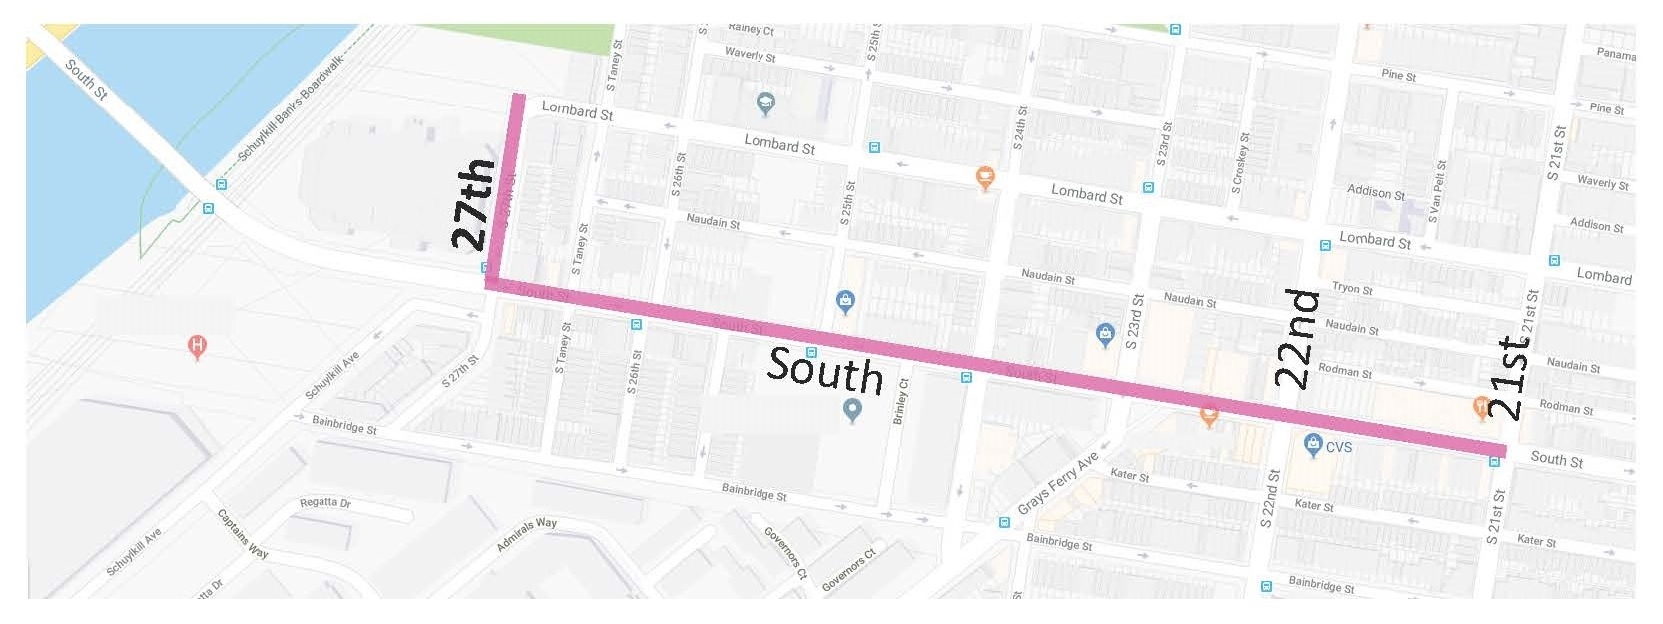 Map featuring the location of the protected bicycle lane on South St. from 27th to 21st streets.